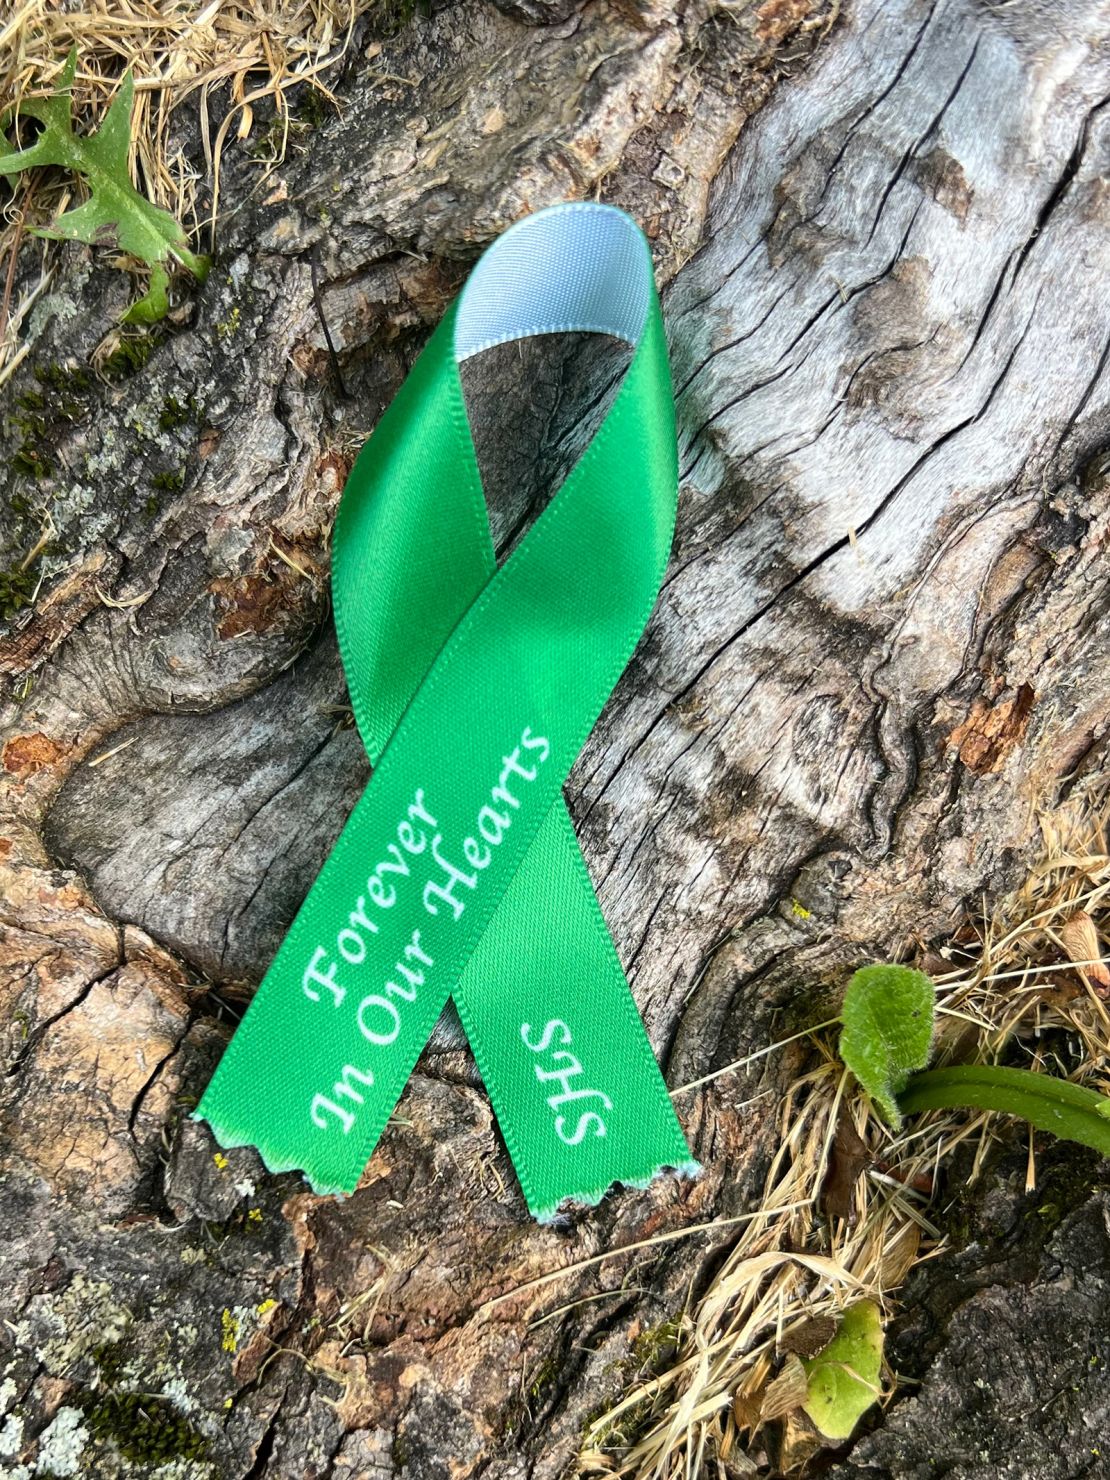 Newtown High's Class of 2024 will wear green and white ribbons on their graduation gowns to remember those they lost.